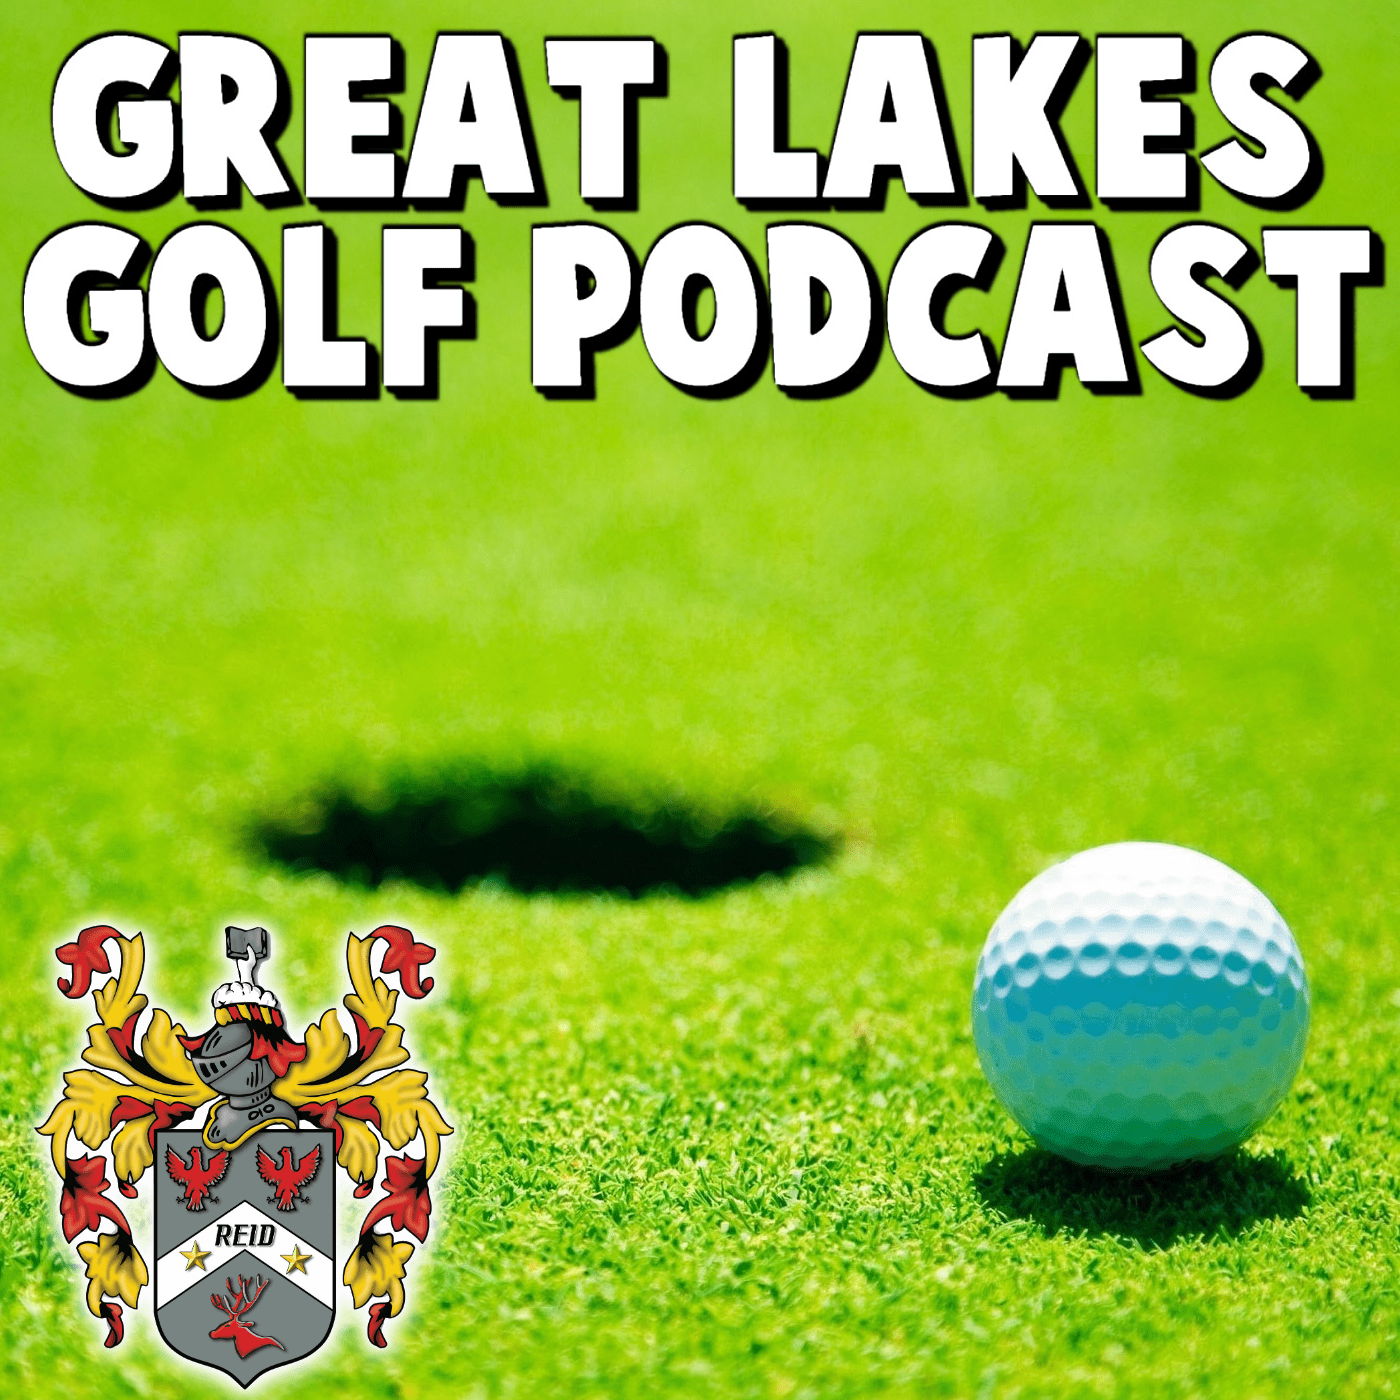 Great Lakes Golf Podcast